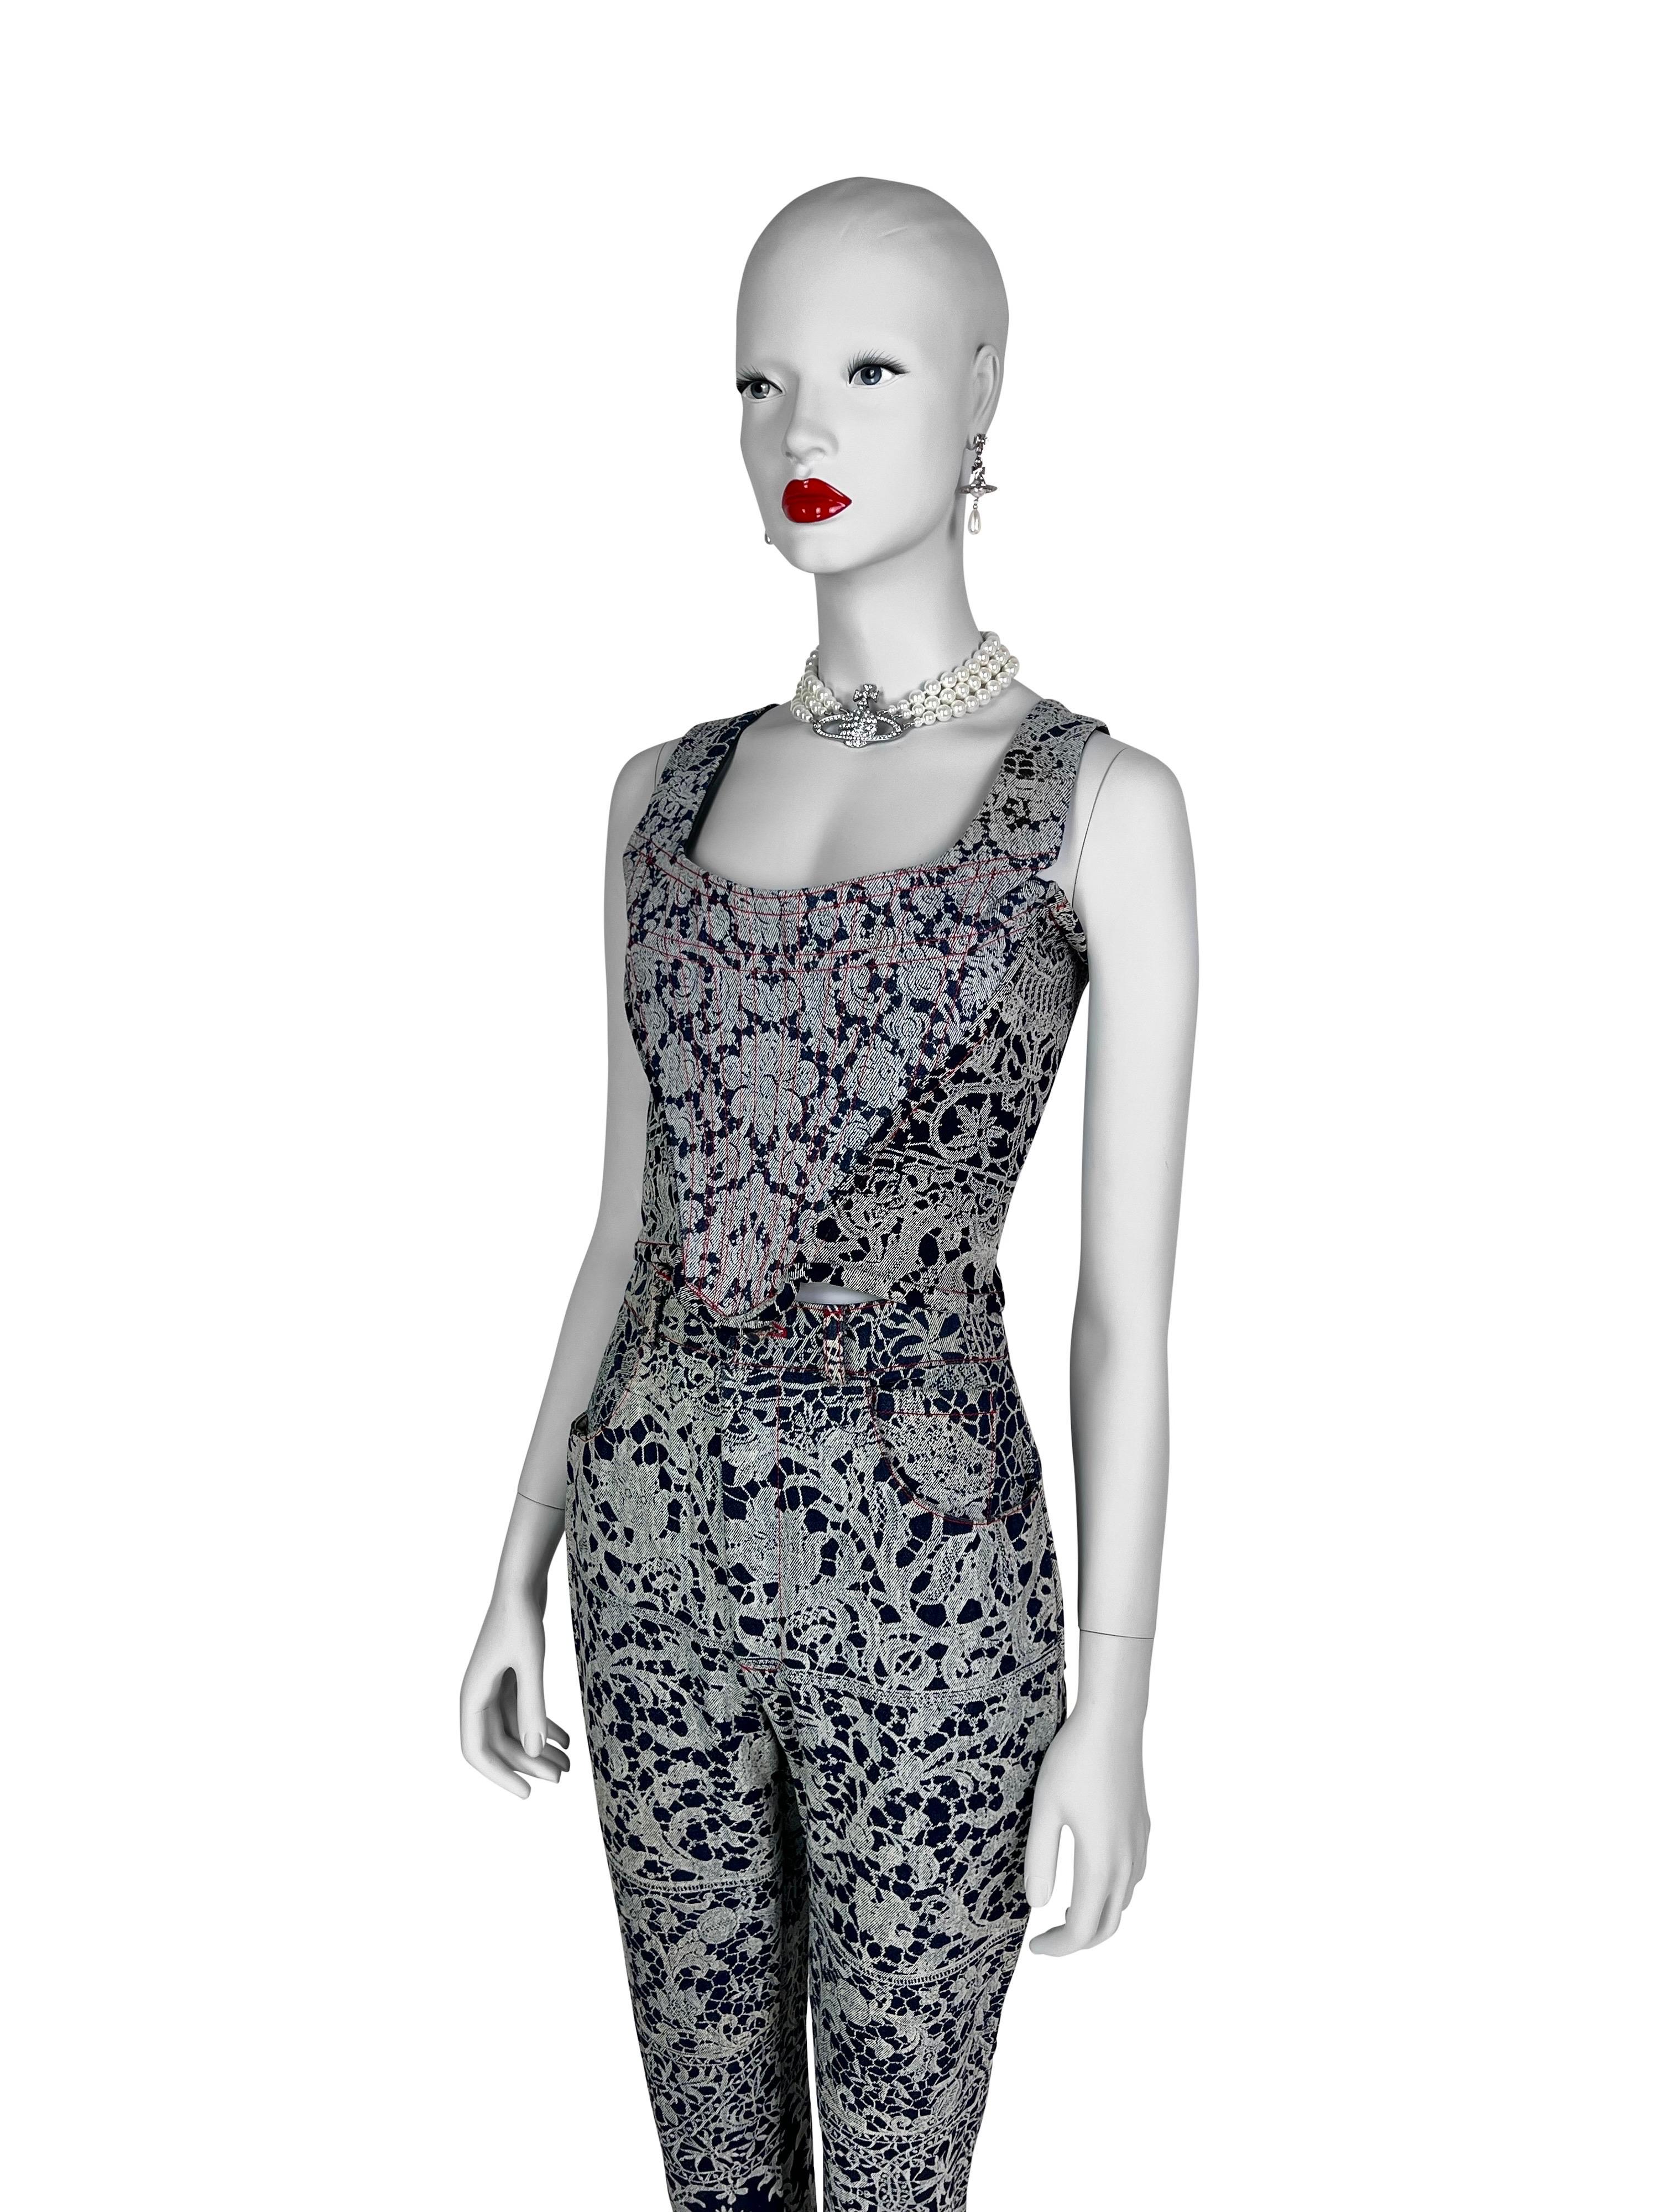 Vivienne Westwood Fall 1992 “Always on Camera” Lace Print Denim Corset Set  In Good Condition For Sale In Prague, CZ